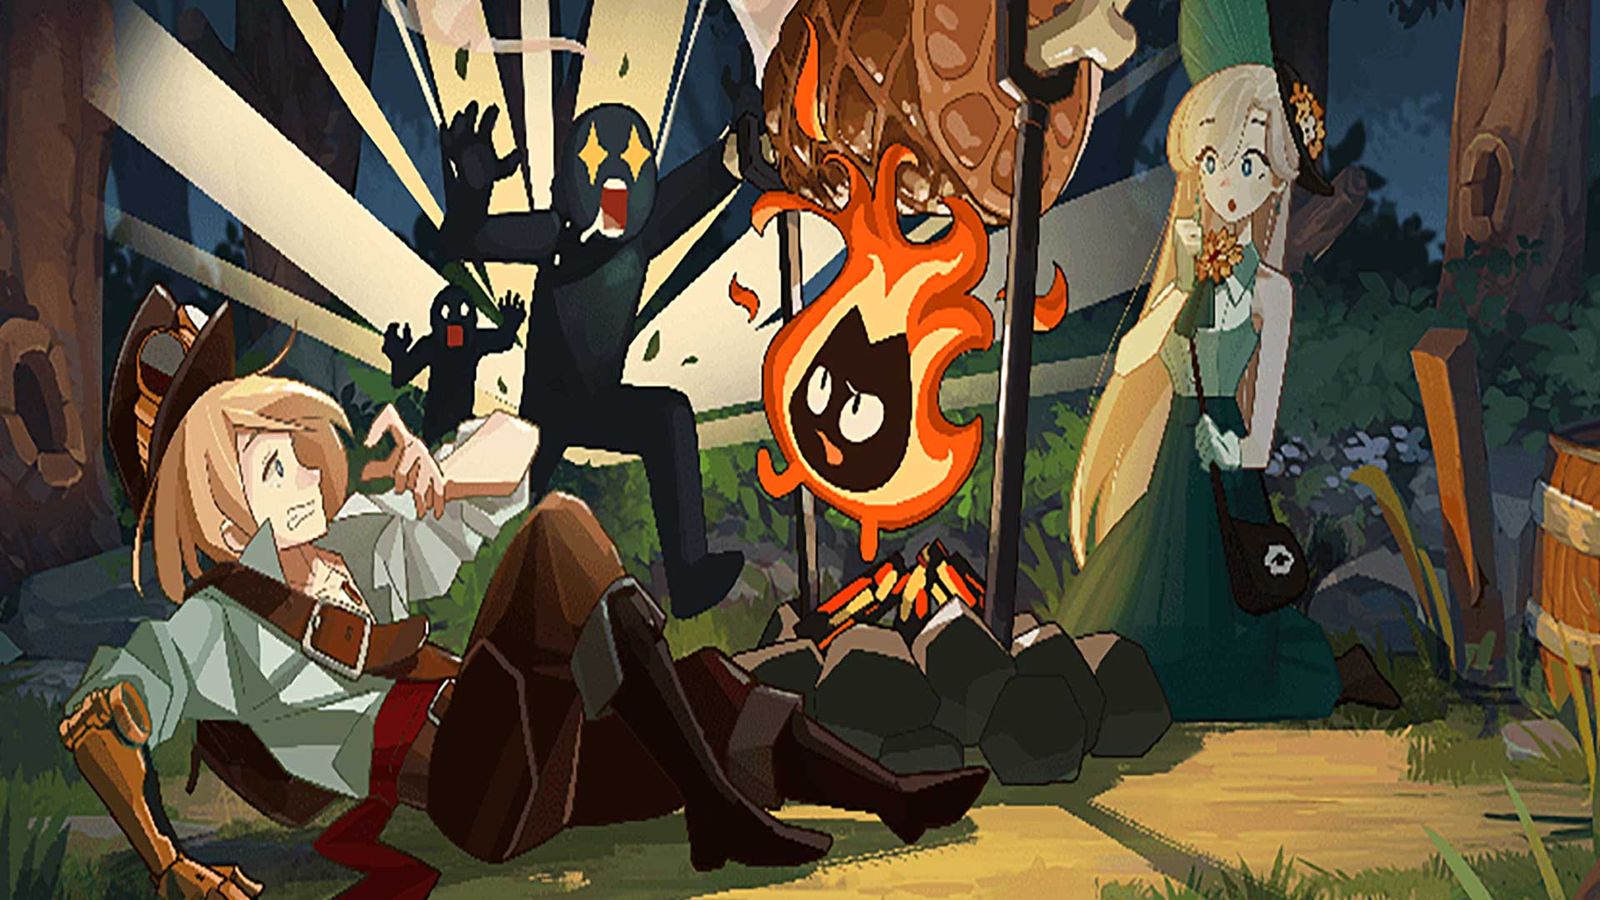 Promotional art for Fortress Saga showing two characters being surprised by a shadowy figure.